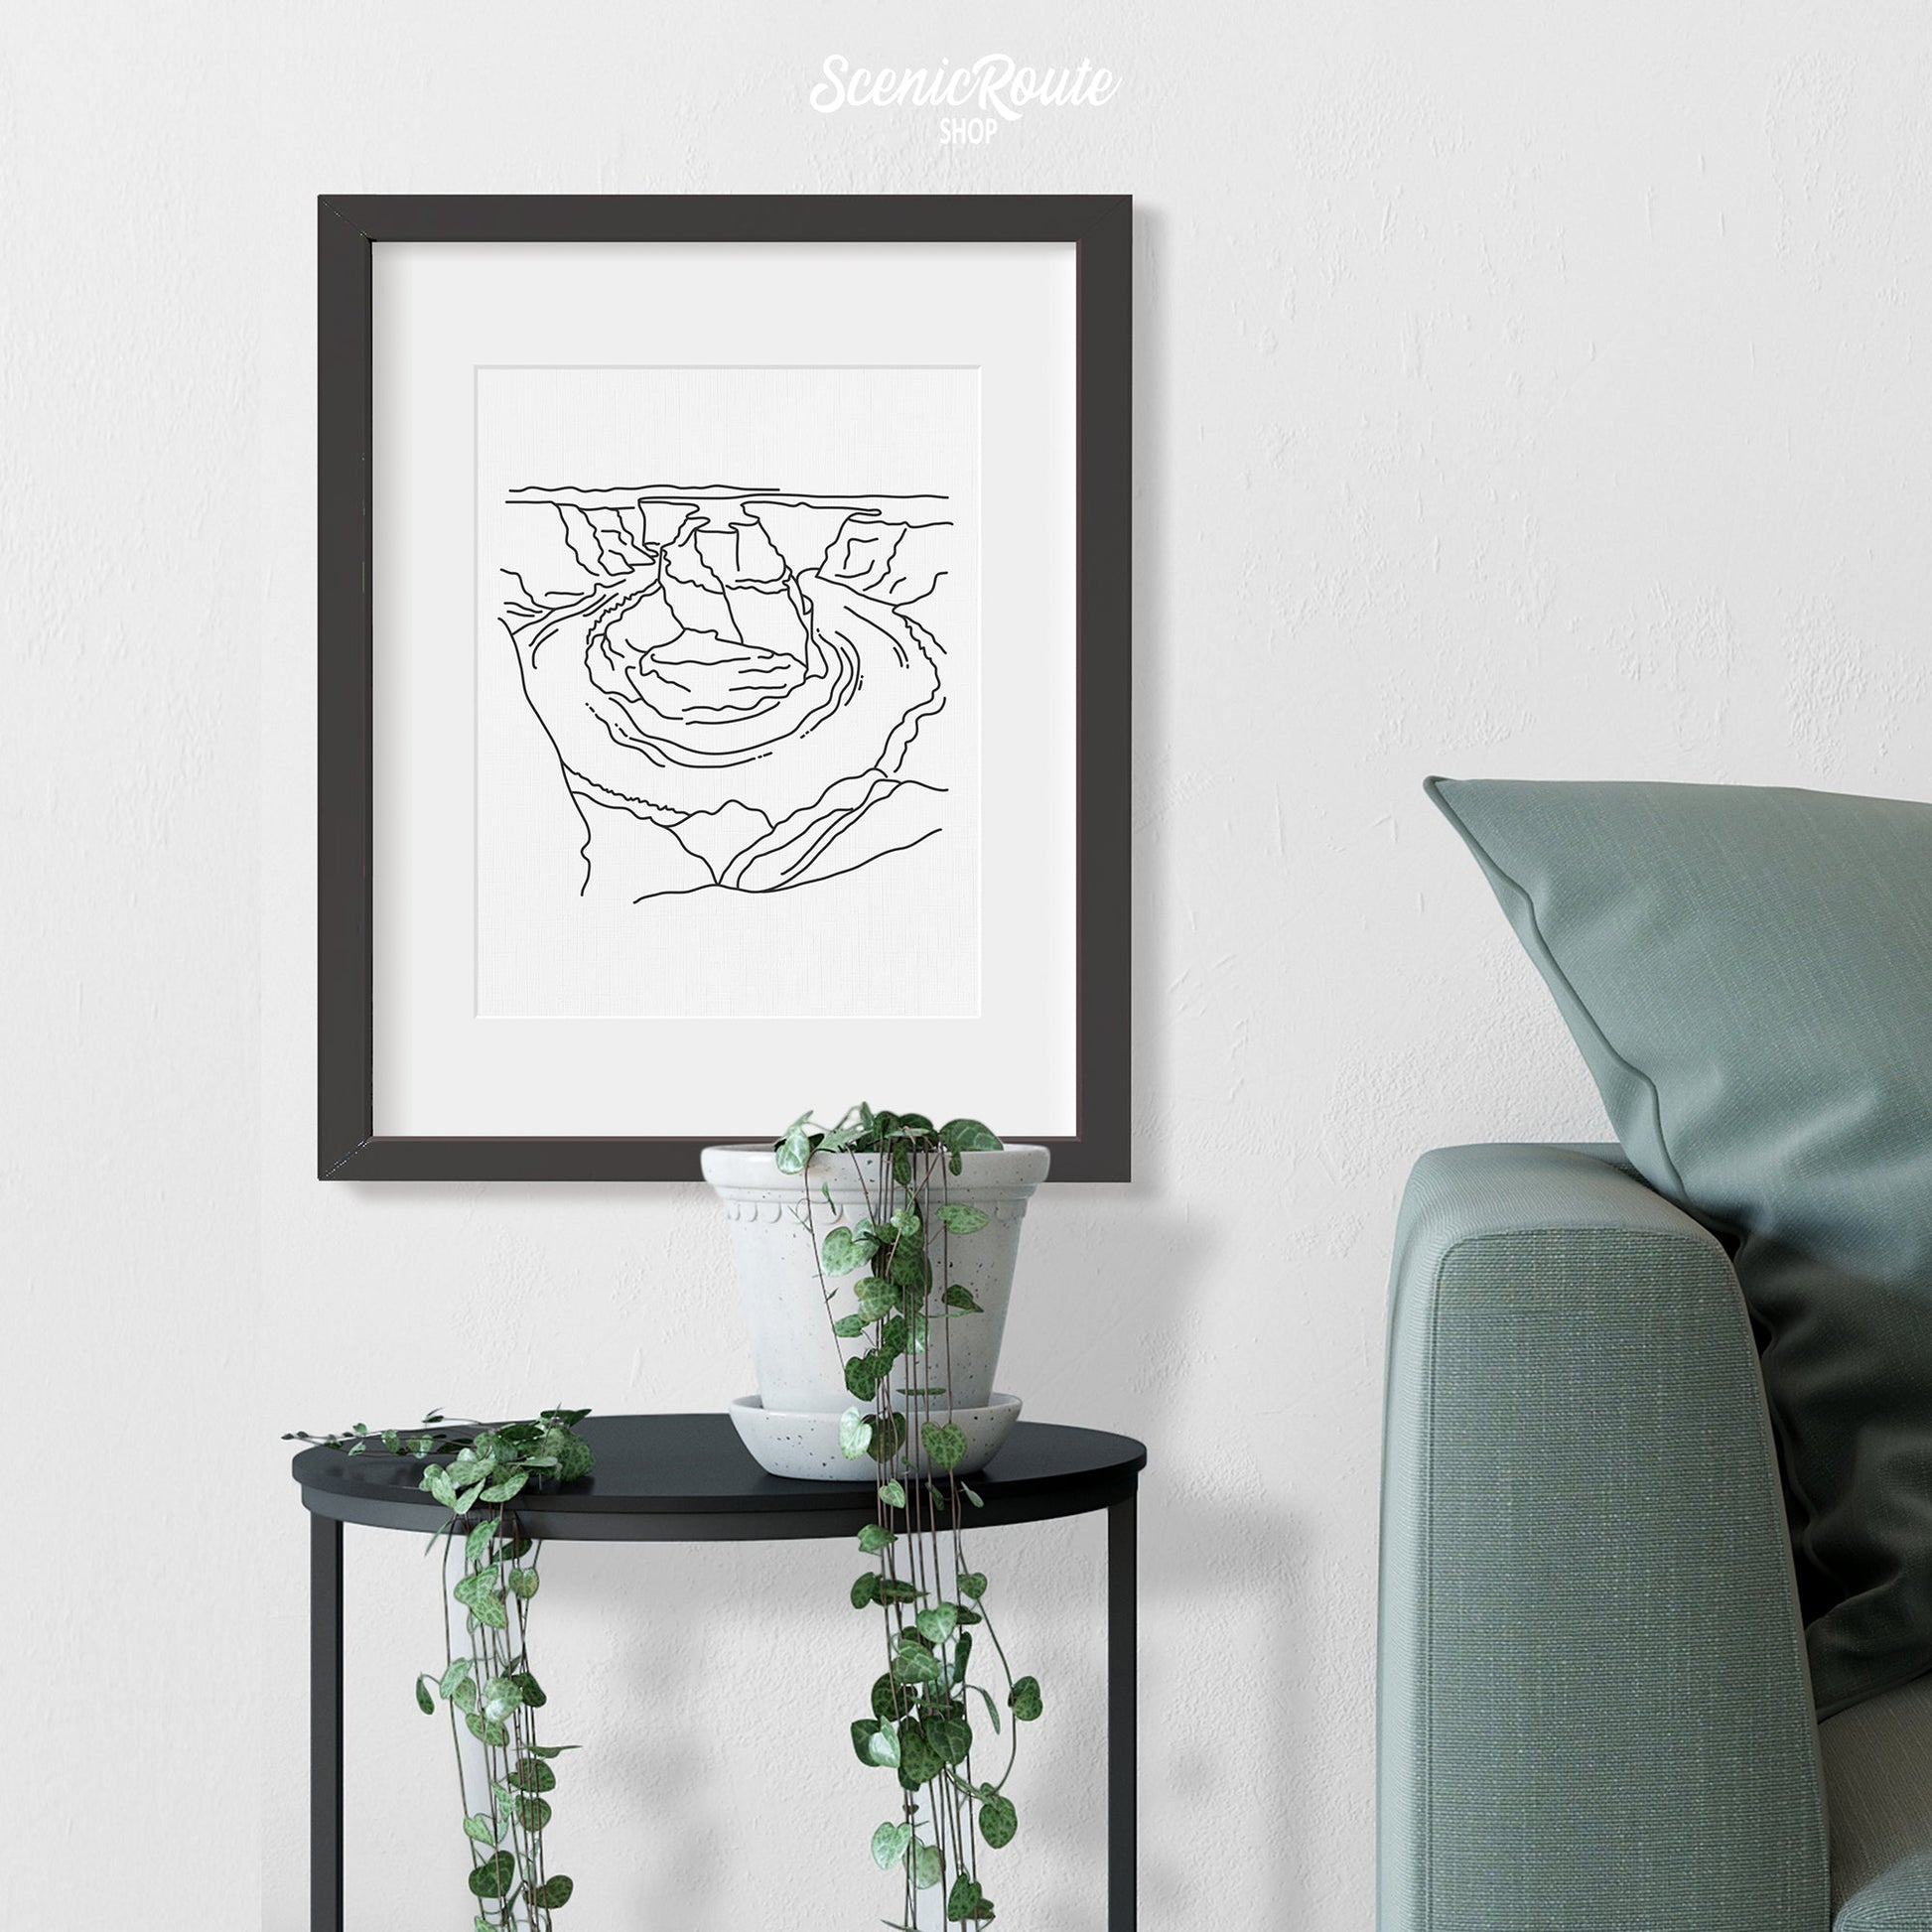 A framed line art drawing of Horseshoe Bend hanging above a side table with a plant